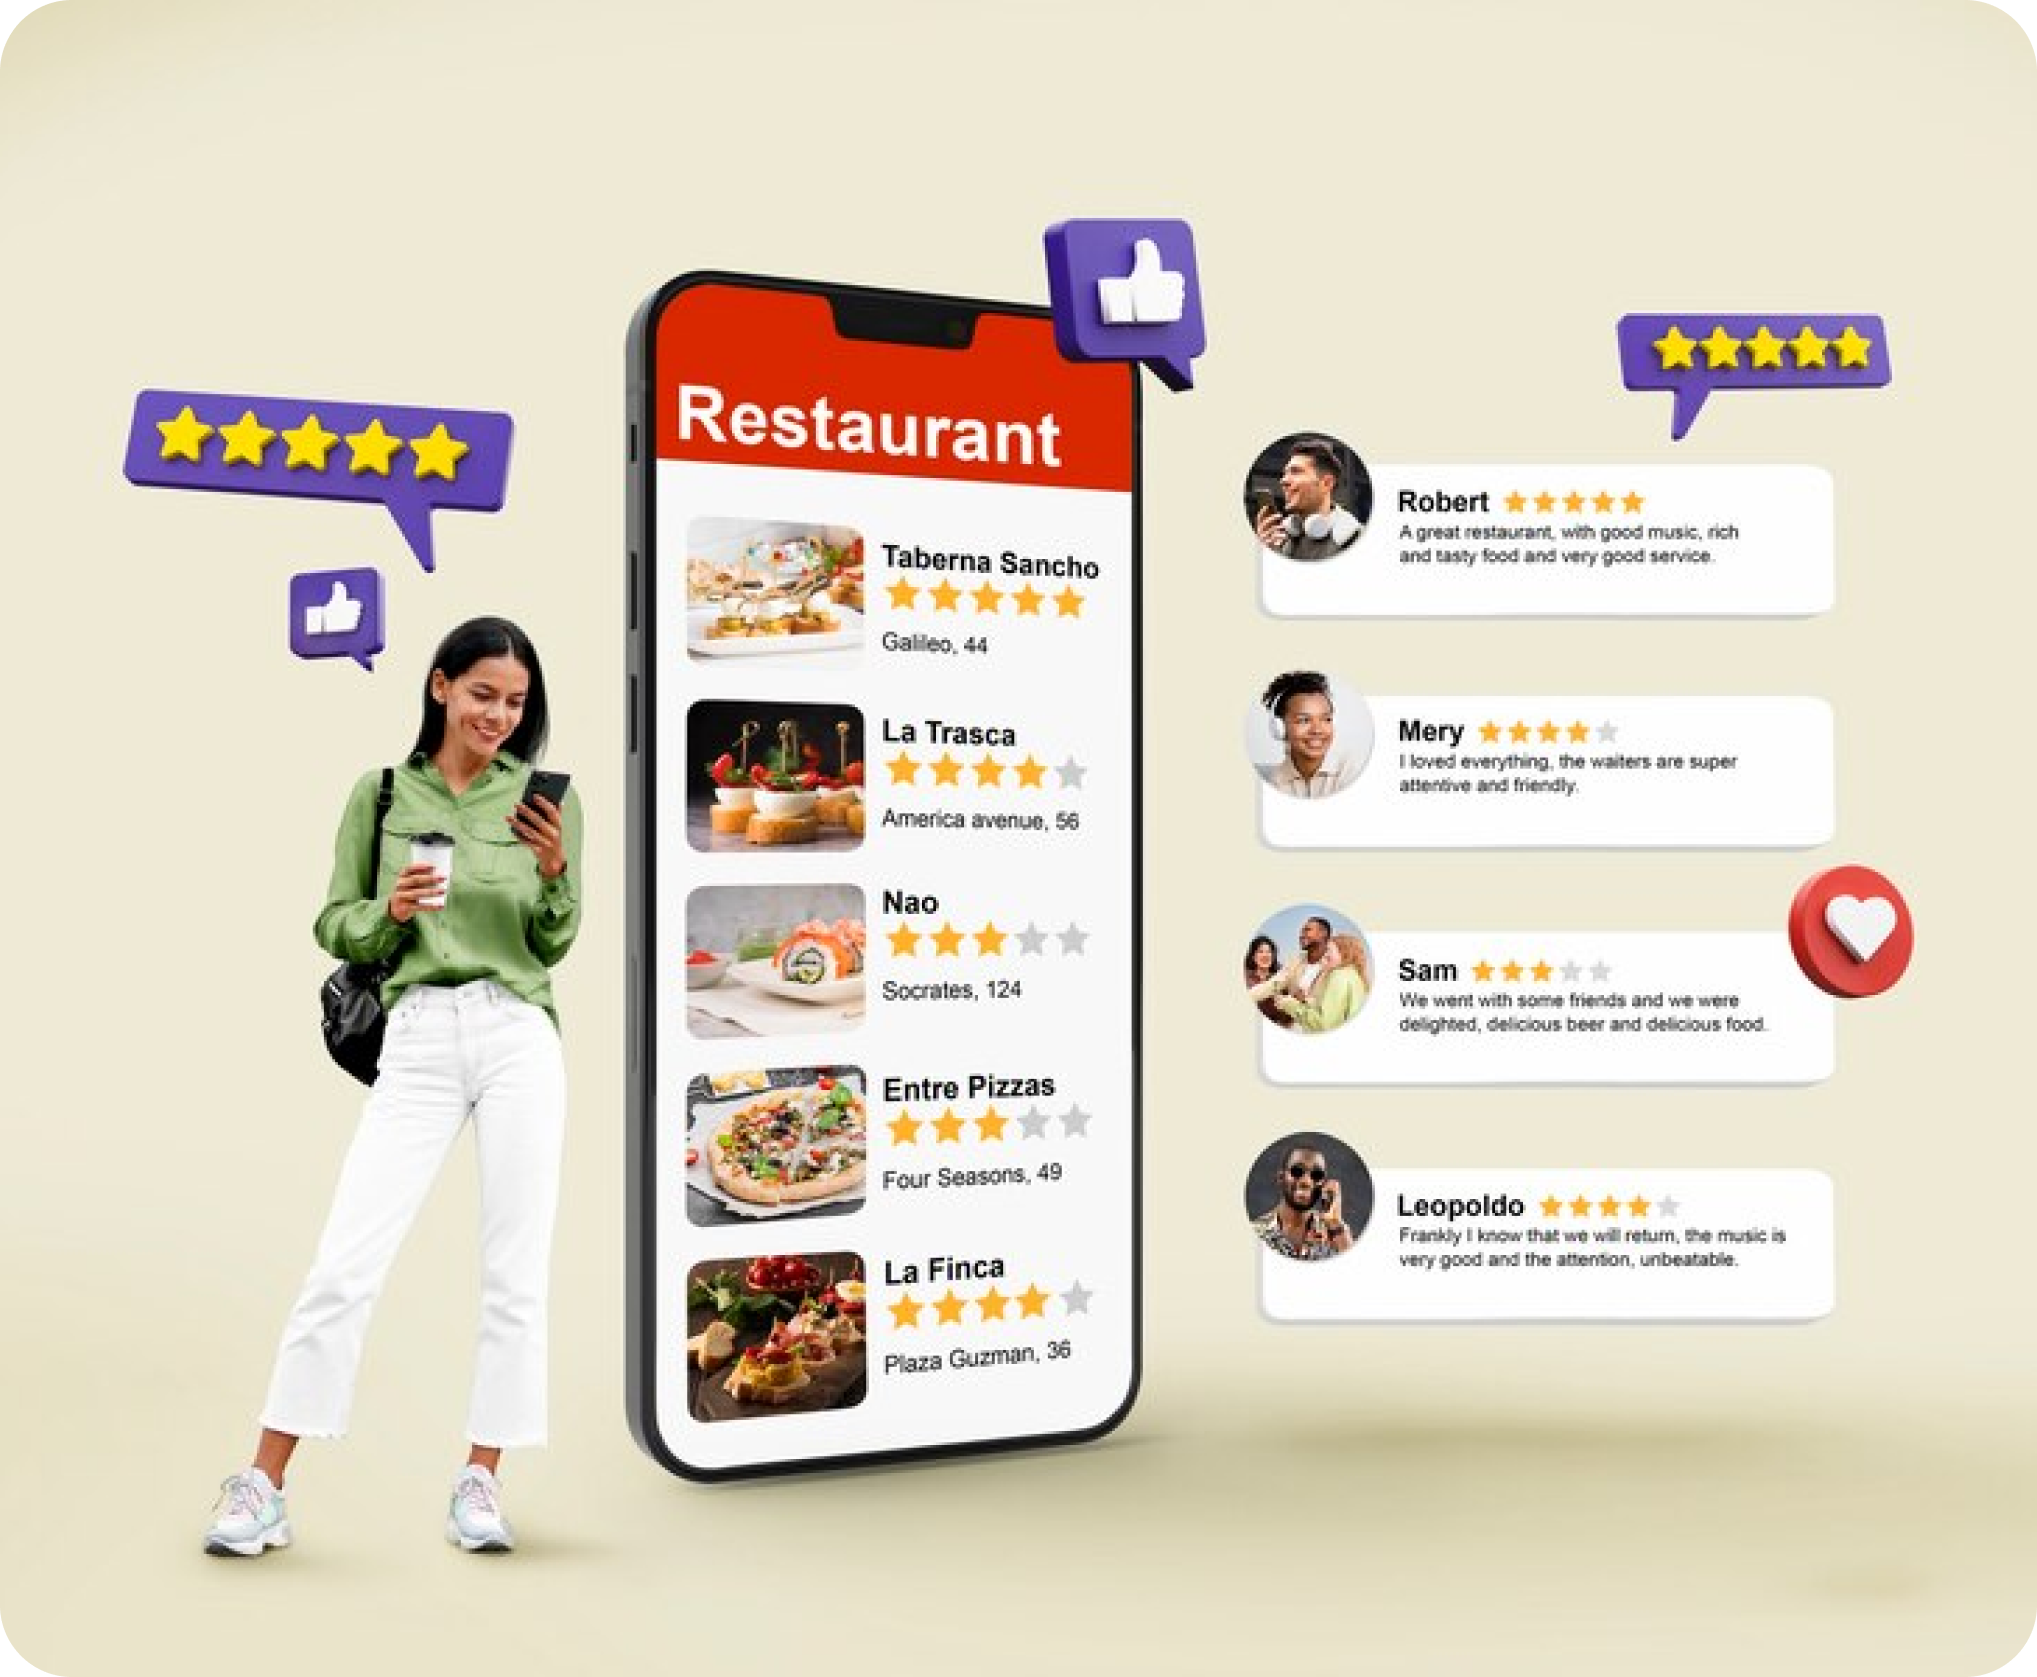 Manage your restaurant review in an automated way to increase rating and gain feedback